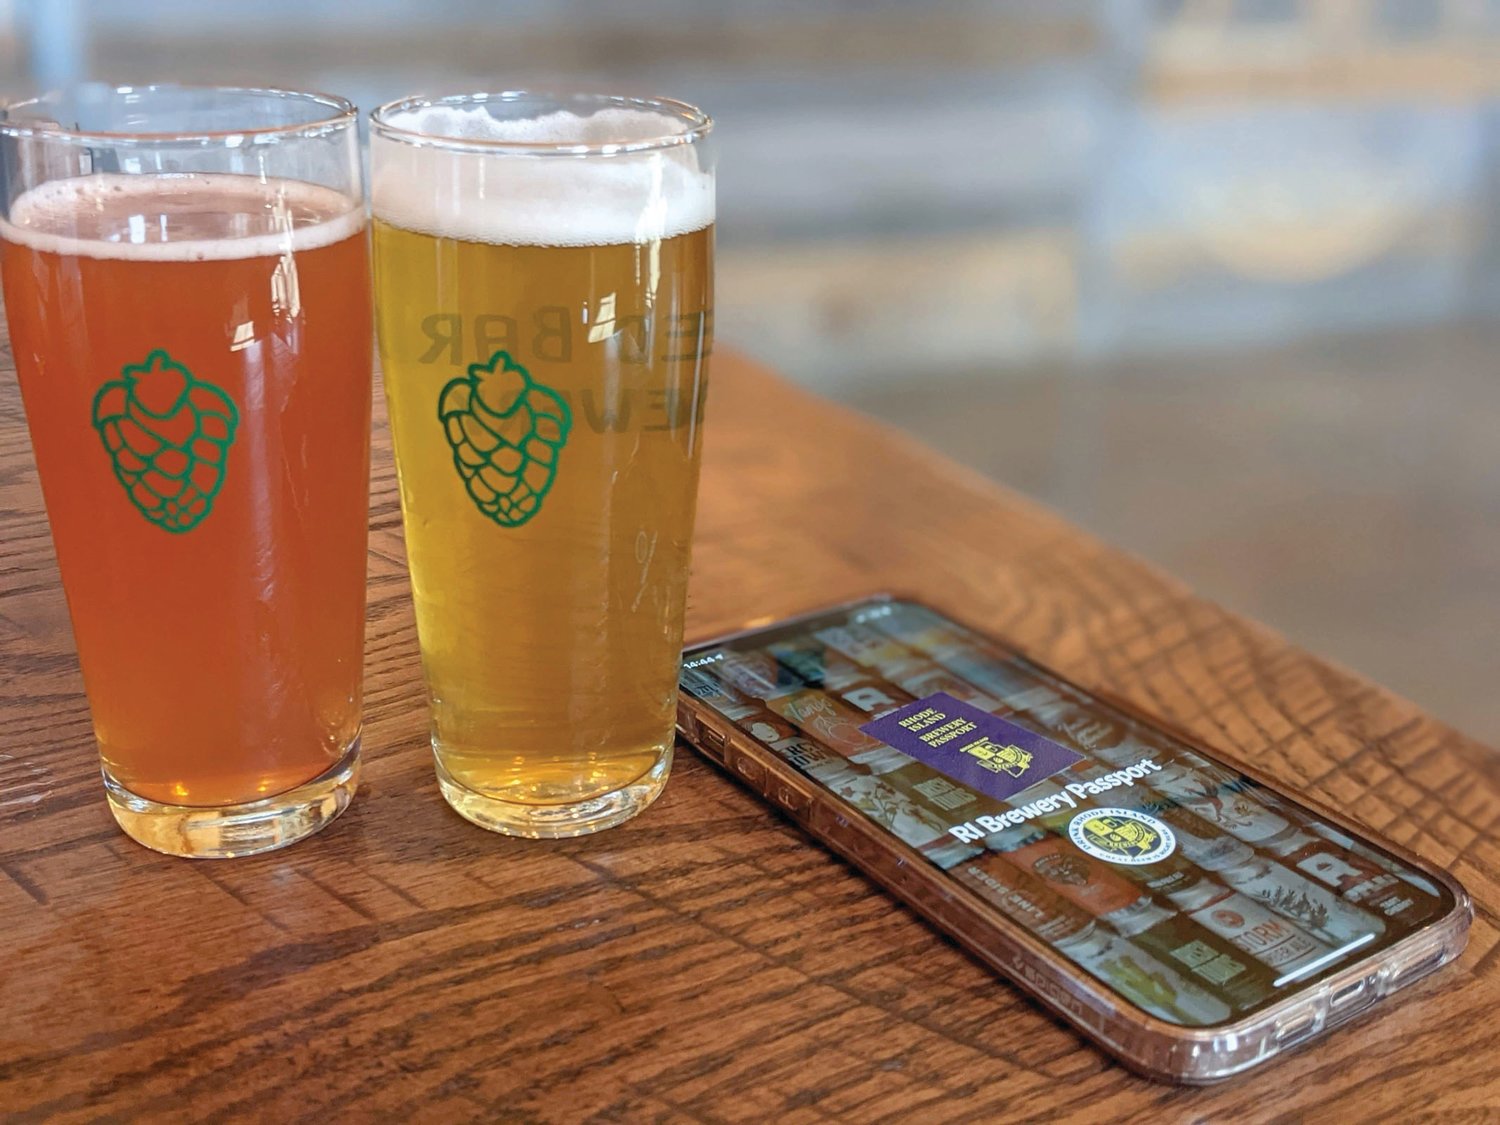 ON YOUR DEVICE: The Brewery Passport is available for iOS and Android services, and can be found through the Guild’s website, ribrewersguild.org.